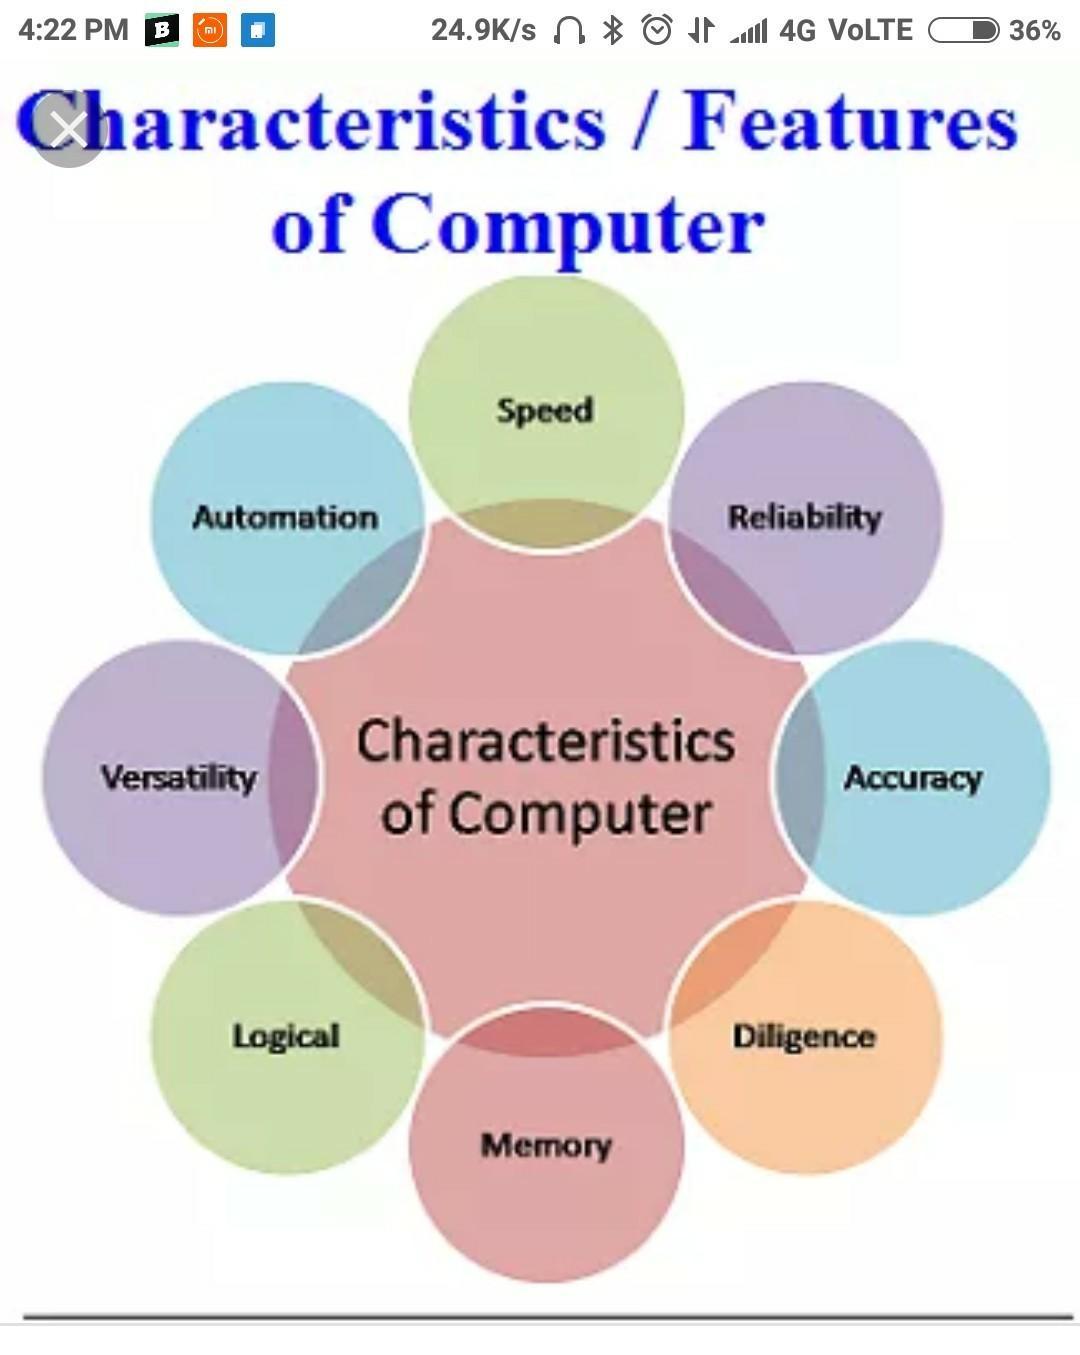 10 characteristic of the computer